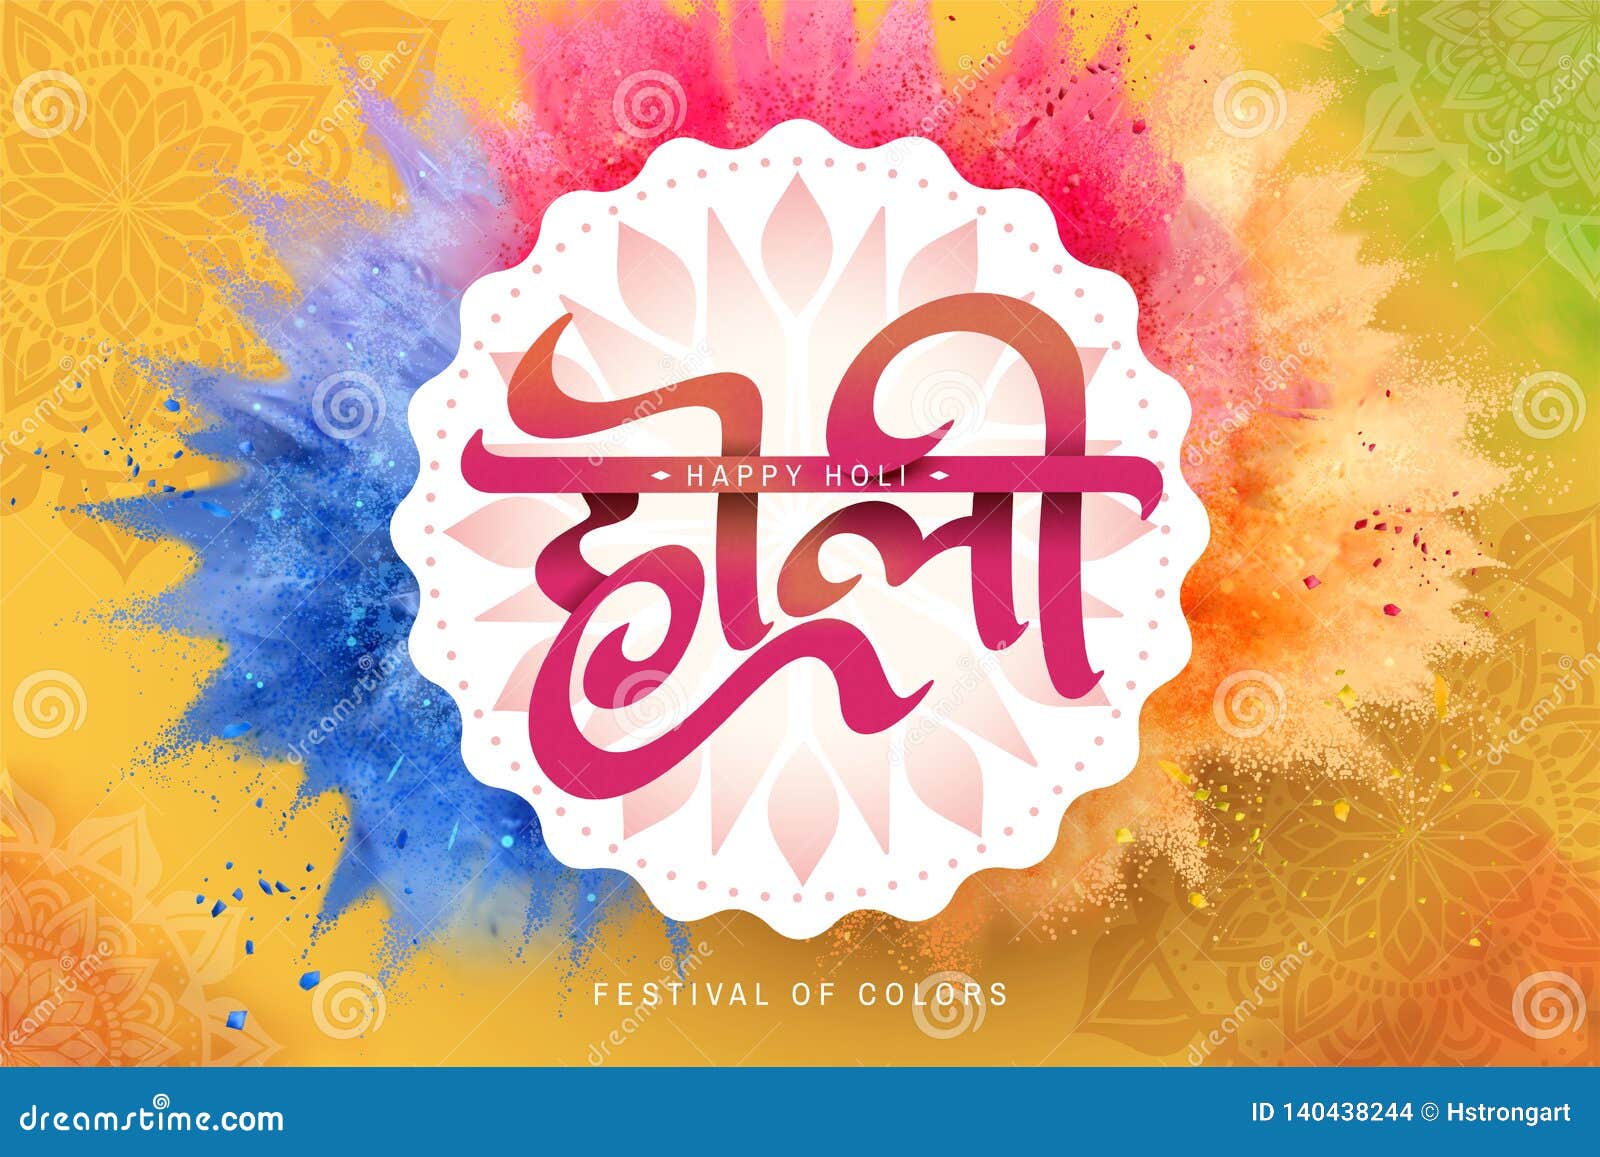 Happy holi poster stock vector. Illustration of india - 140438244